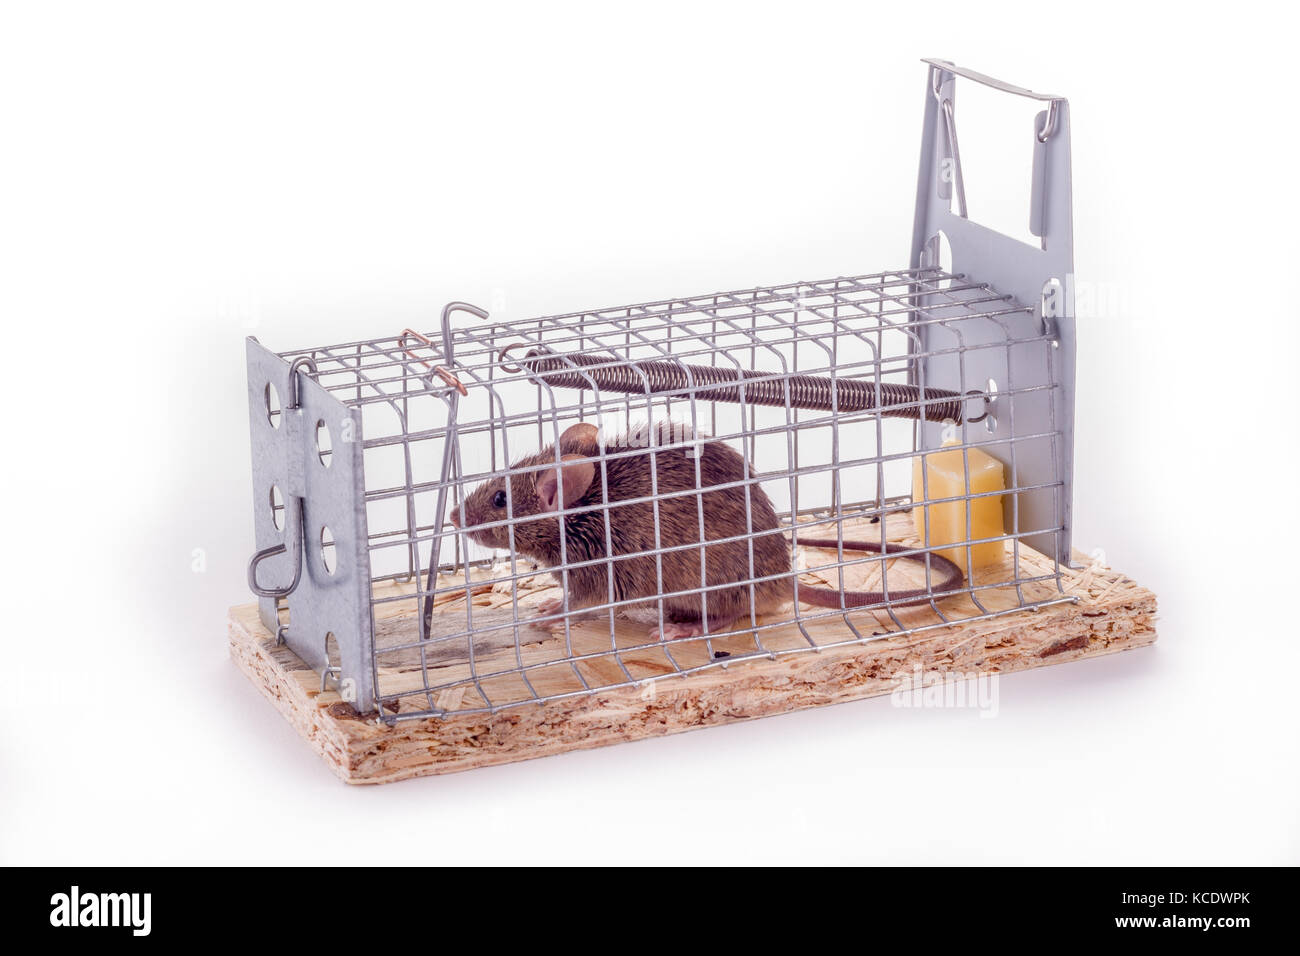 https://c8.alamy.com/comp/KCDWPK/mouse-caught-in-a-live-trap-on-white-background-picture-taken-right-KCDWPK.jpg